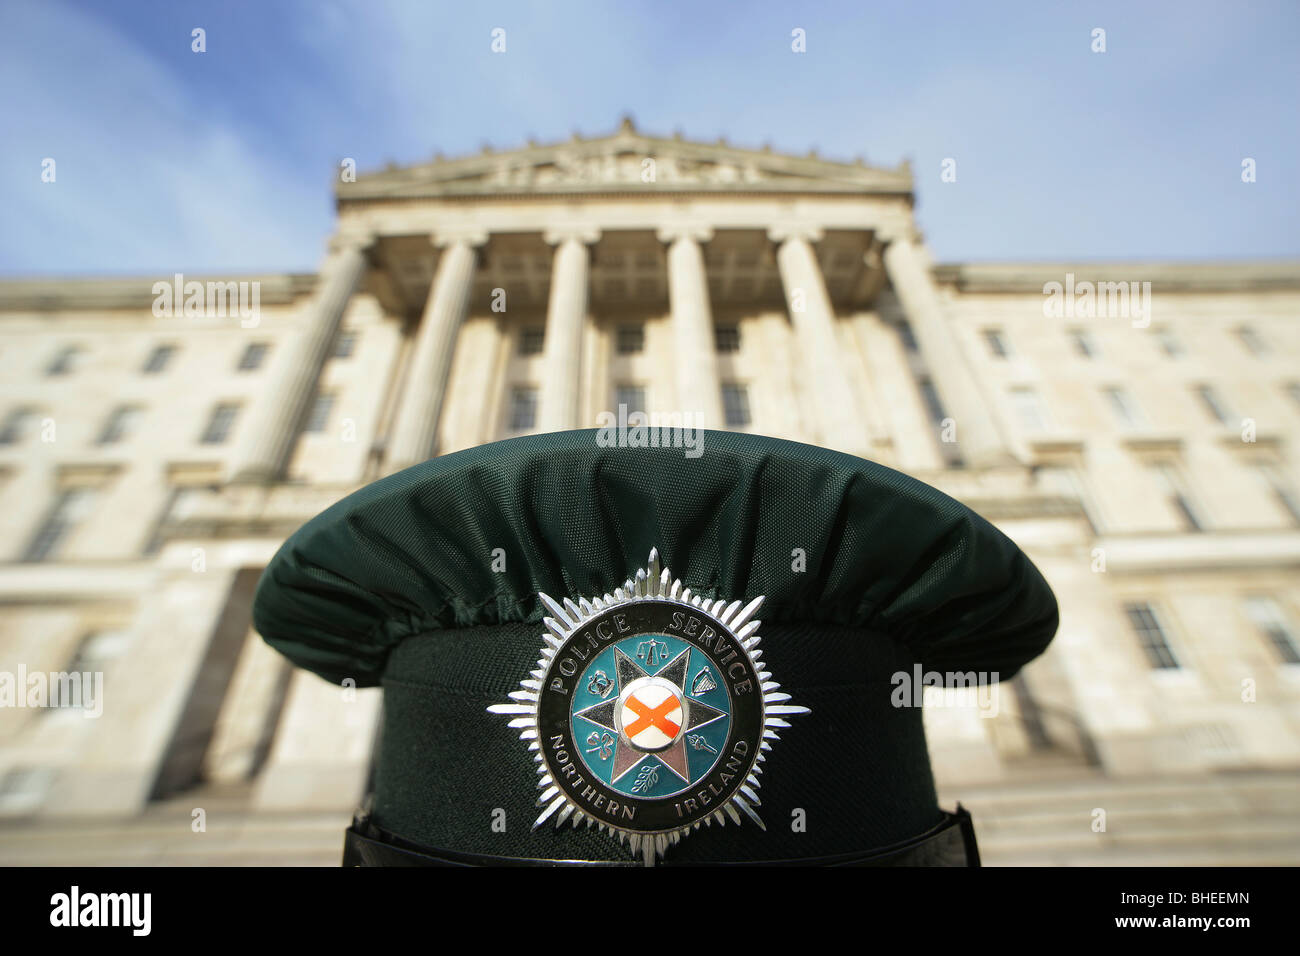 Belfast : A police constable is pictured in front of Stormont Parliament Building in Belfast, Northern Ireland, Stock Photo